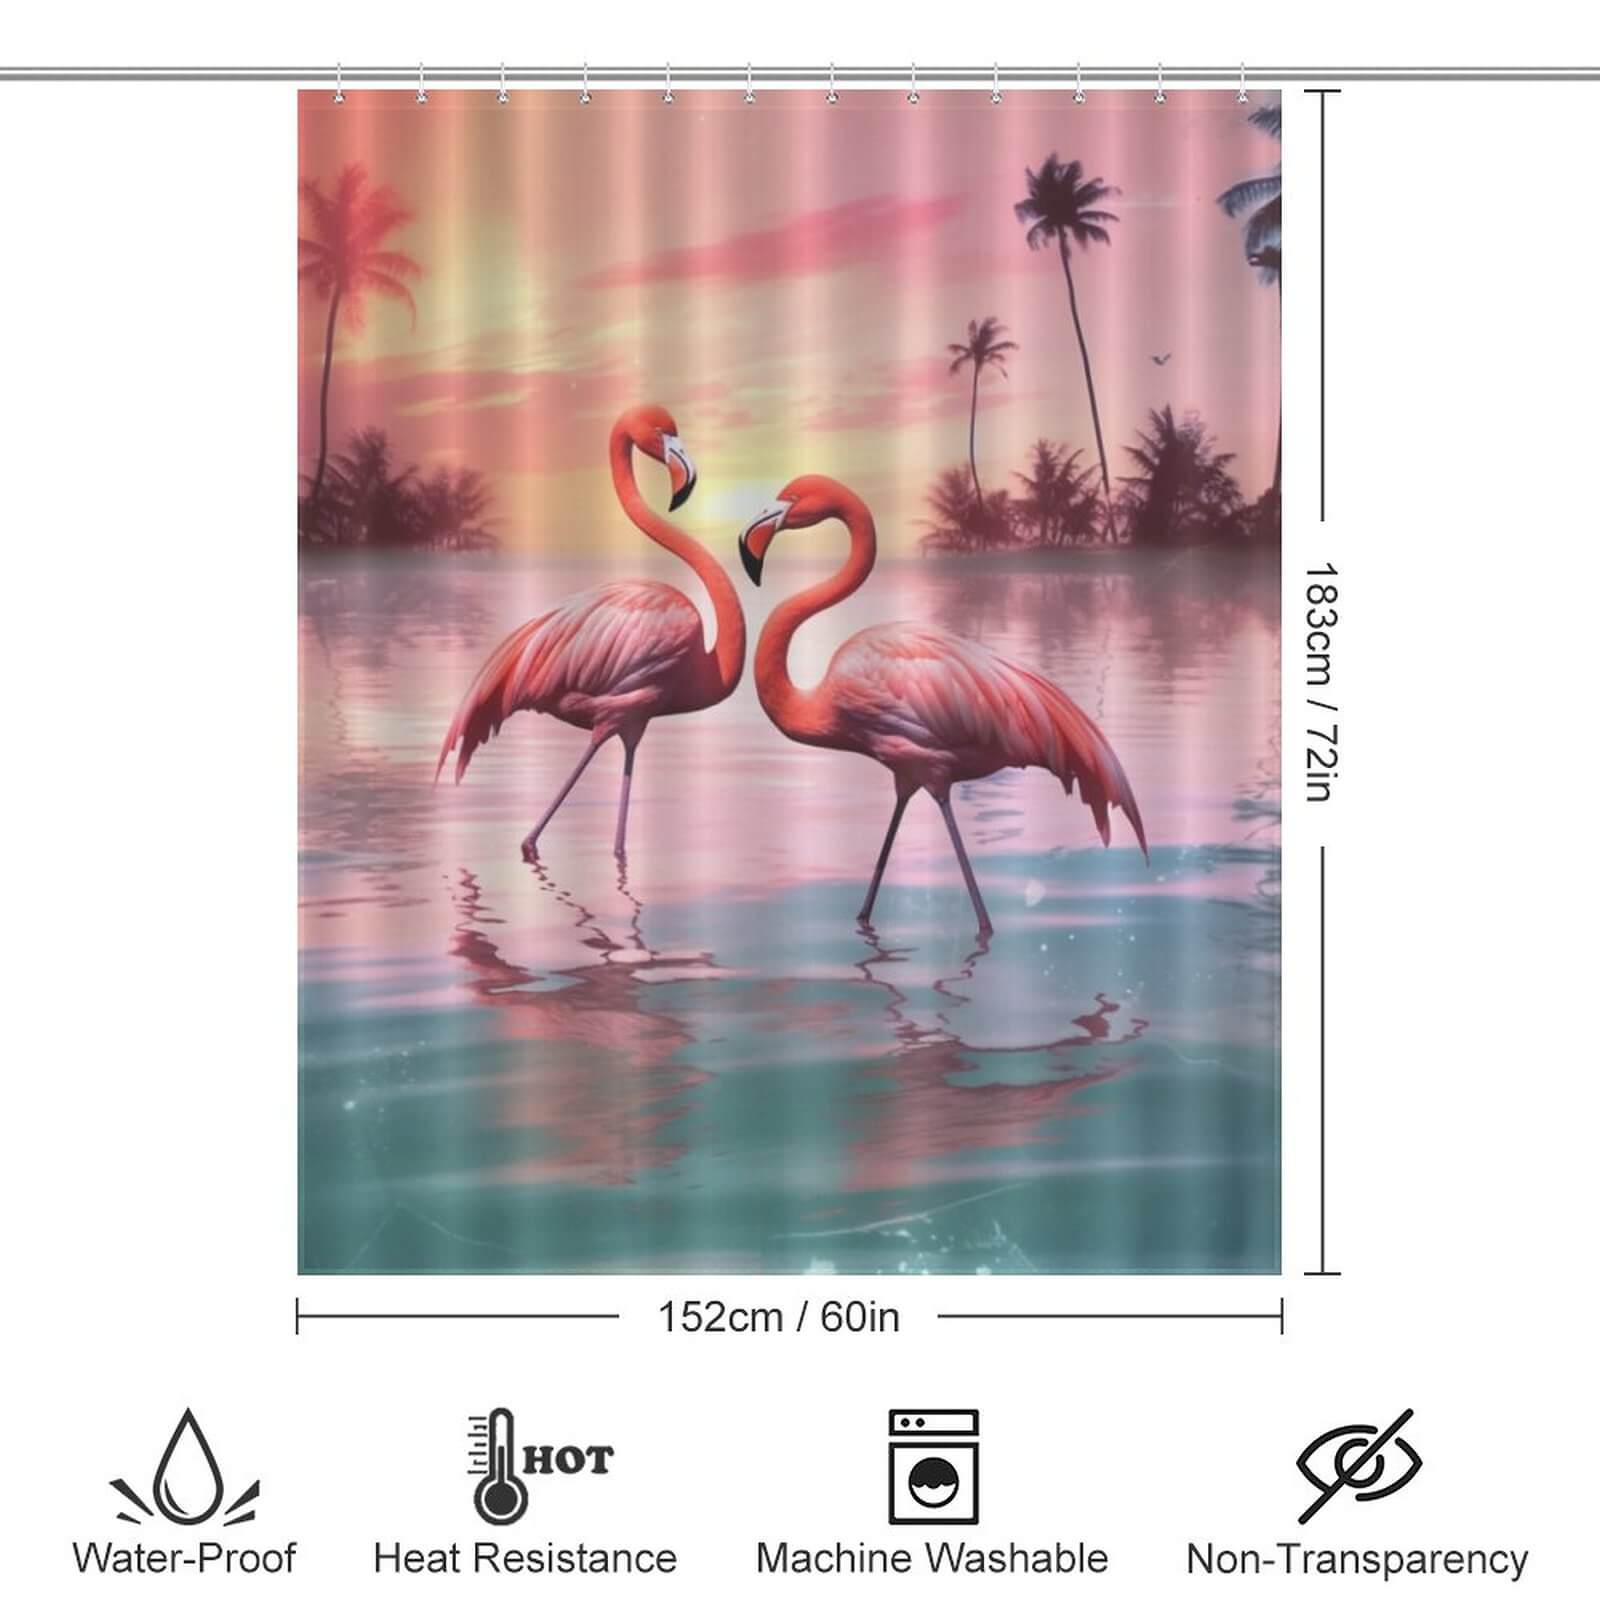 Experience a tropical paradise in your very own bathroom with the Ocean Beach Flamingo Shower Curtain-Cottoncat by Cotton Cat. Made of waterproof material, this flamingo shower curtain is both functional and stylish, bringing a touch of nature and elegance.